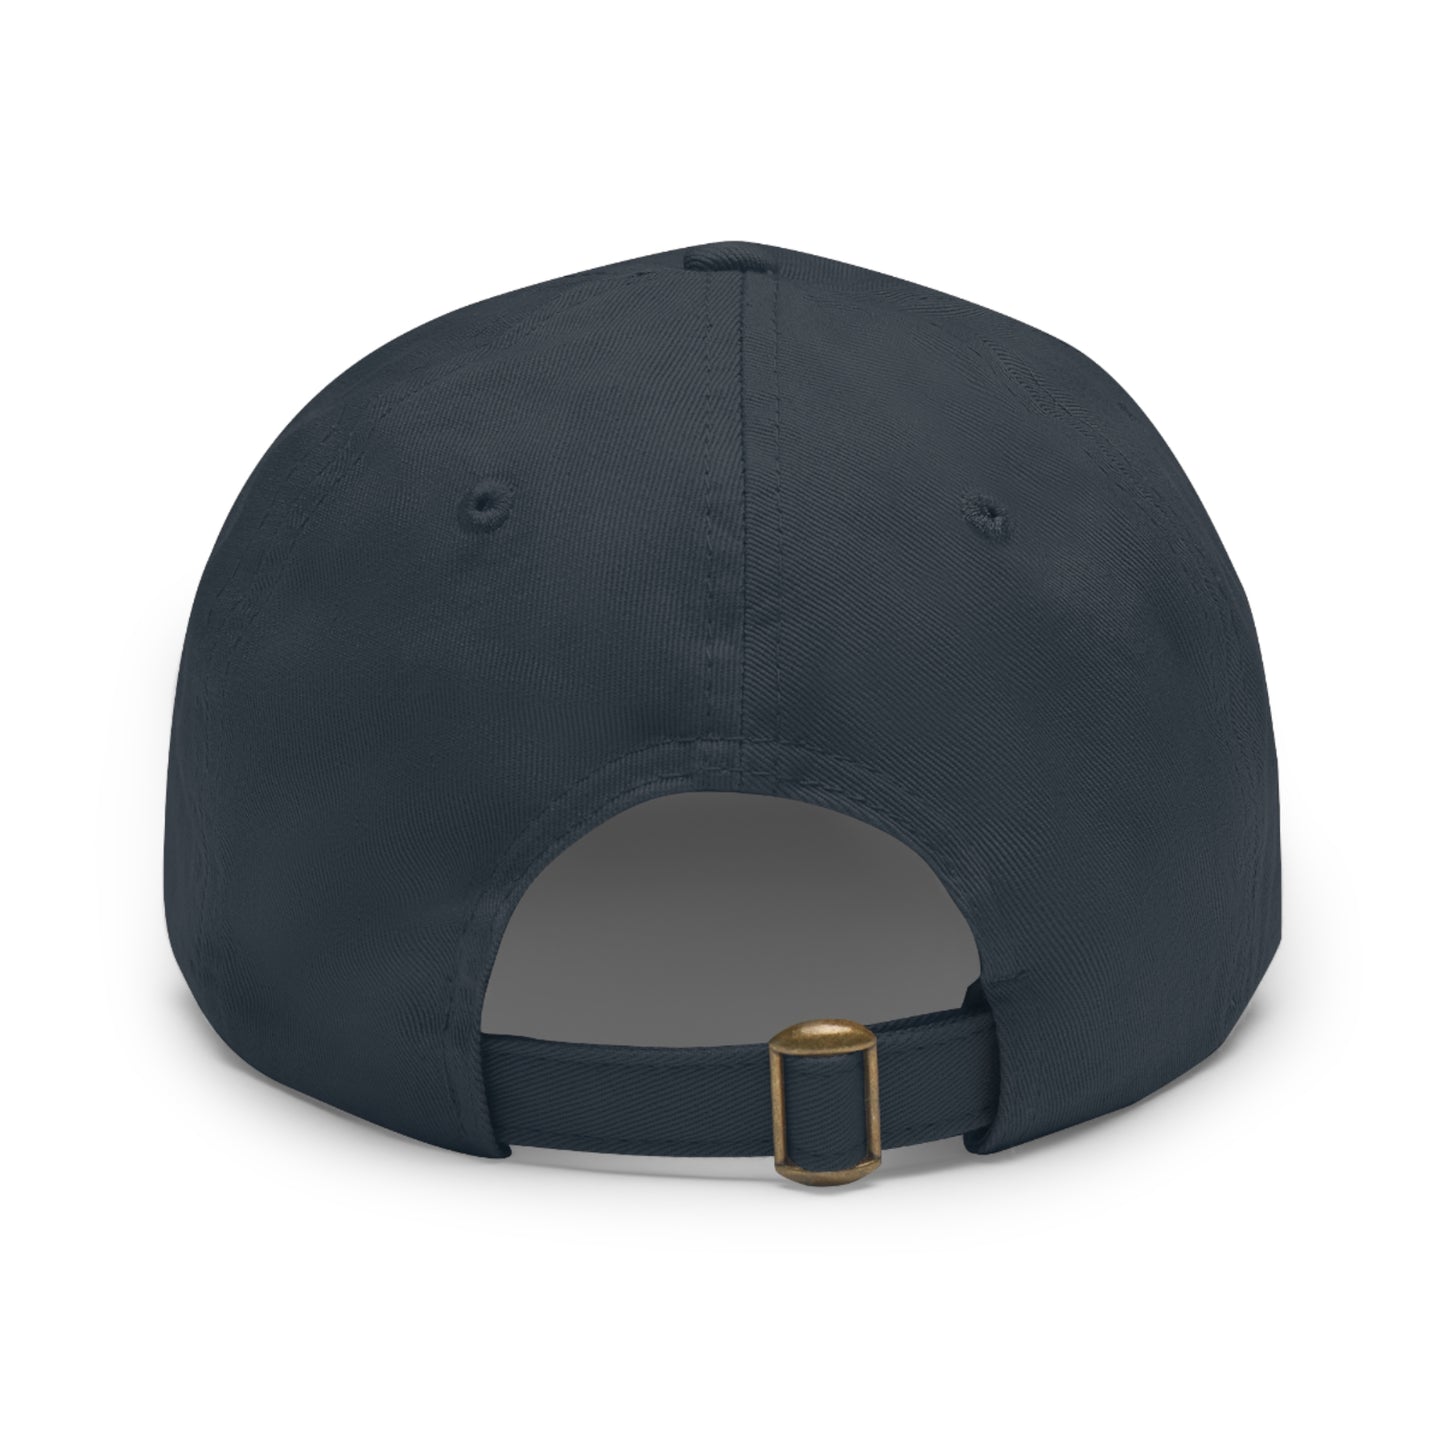 Billy Goat Taled Dad Hat with Leather Patch